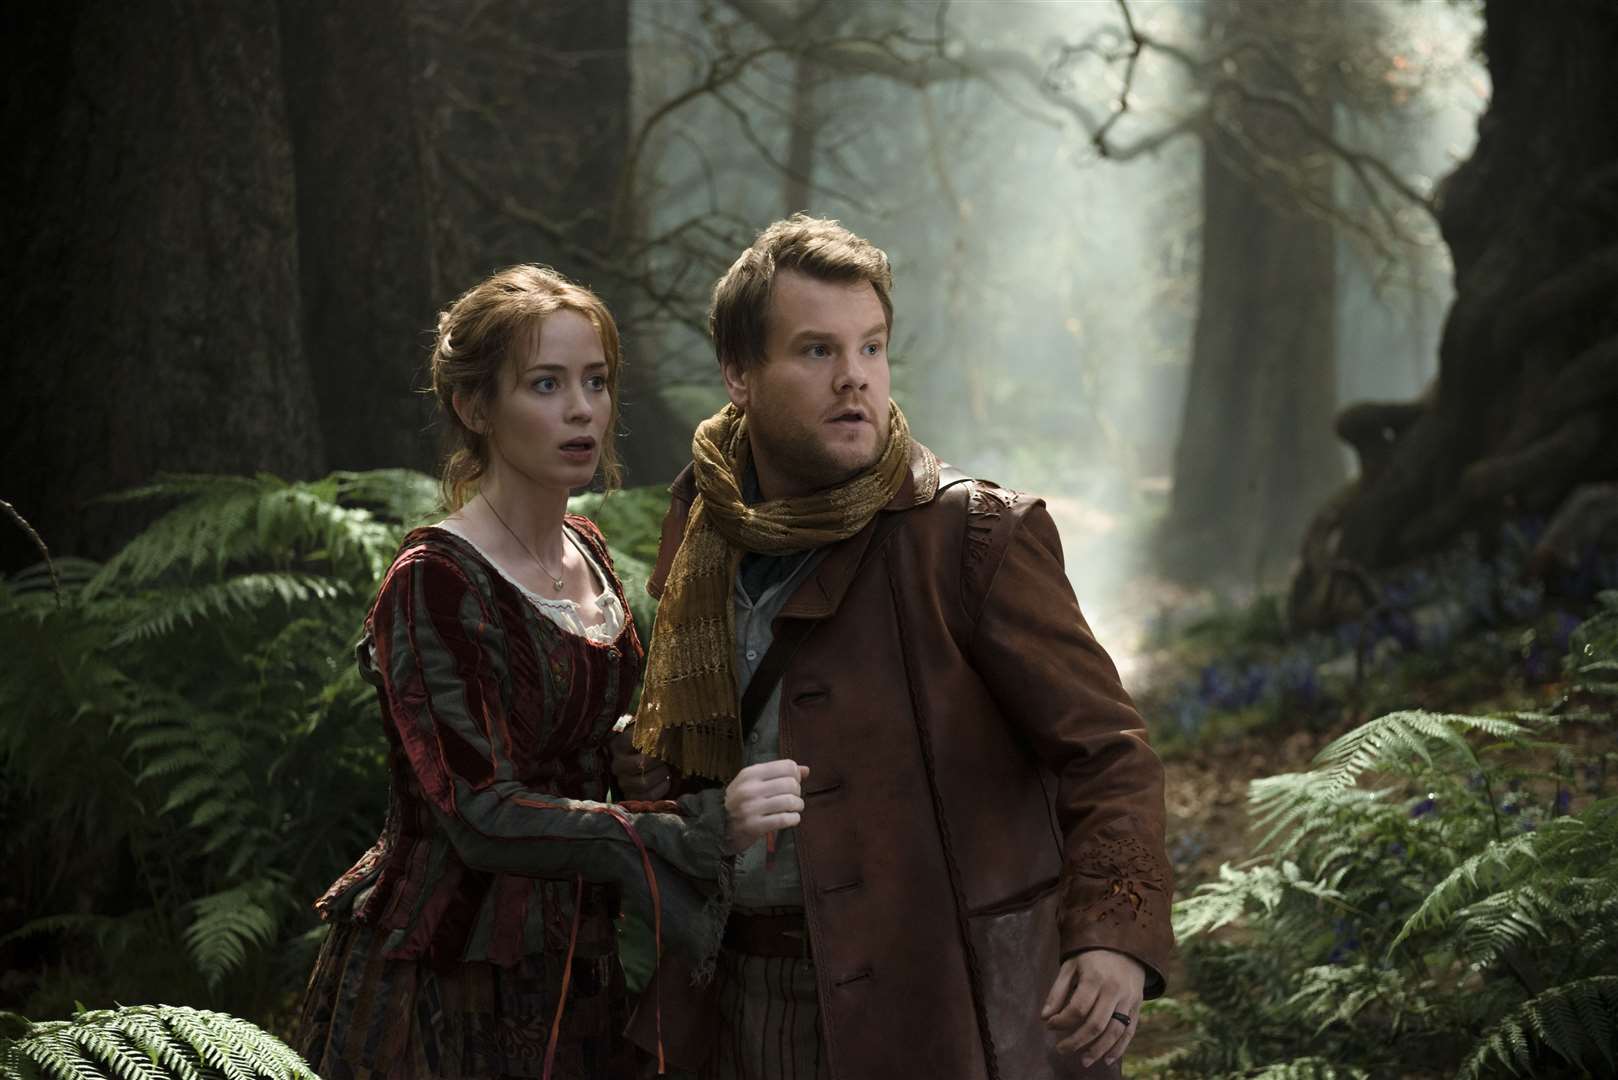 Emily Blunt and James Corden star as a baker and his wife in Into The Woods, filmed in part at Dover Castle